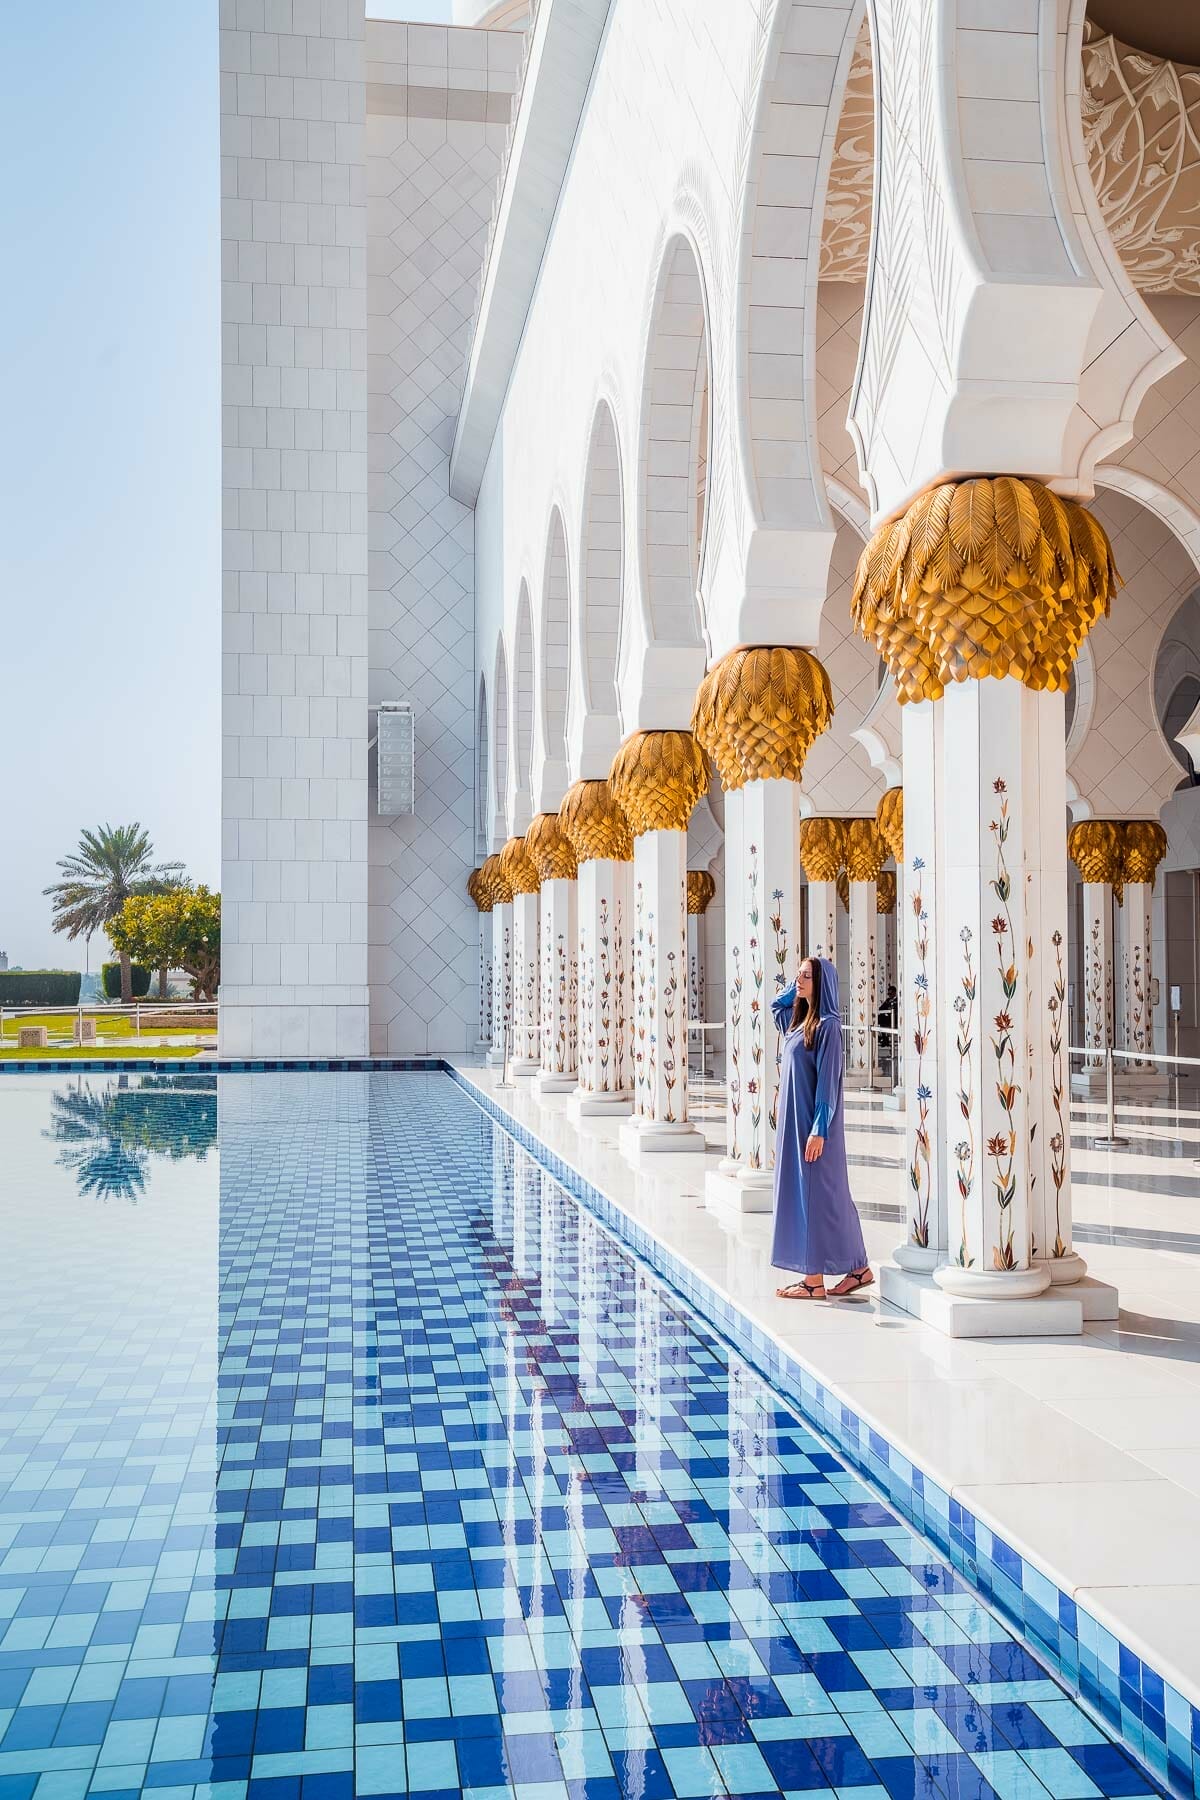 Girl in a blue abaya standing by the pool in Sheikh Zayed Grand Mosque, Abu Dhabi